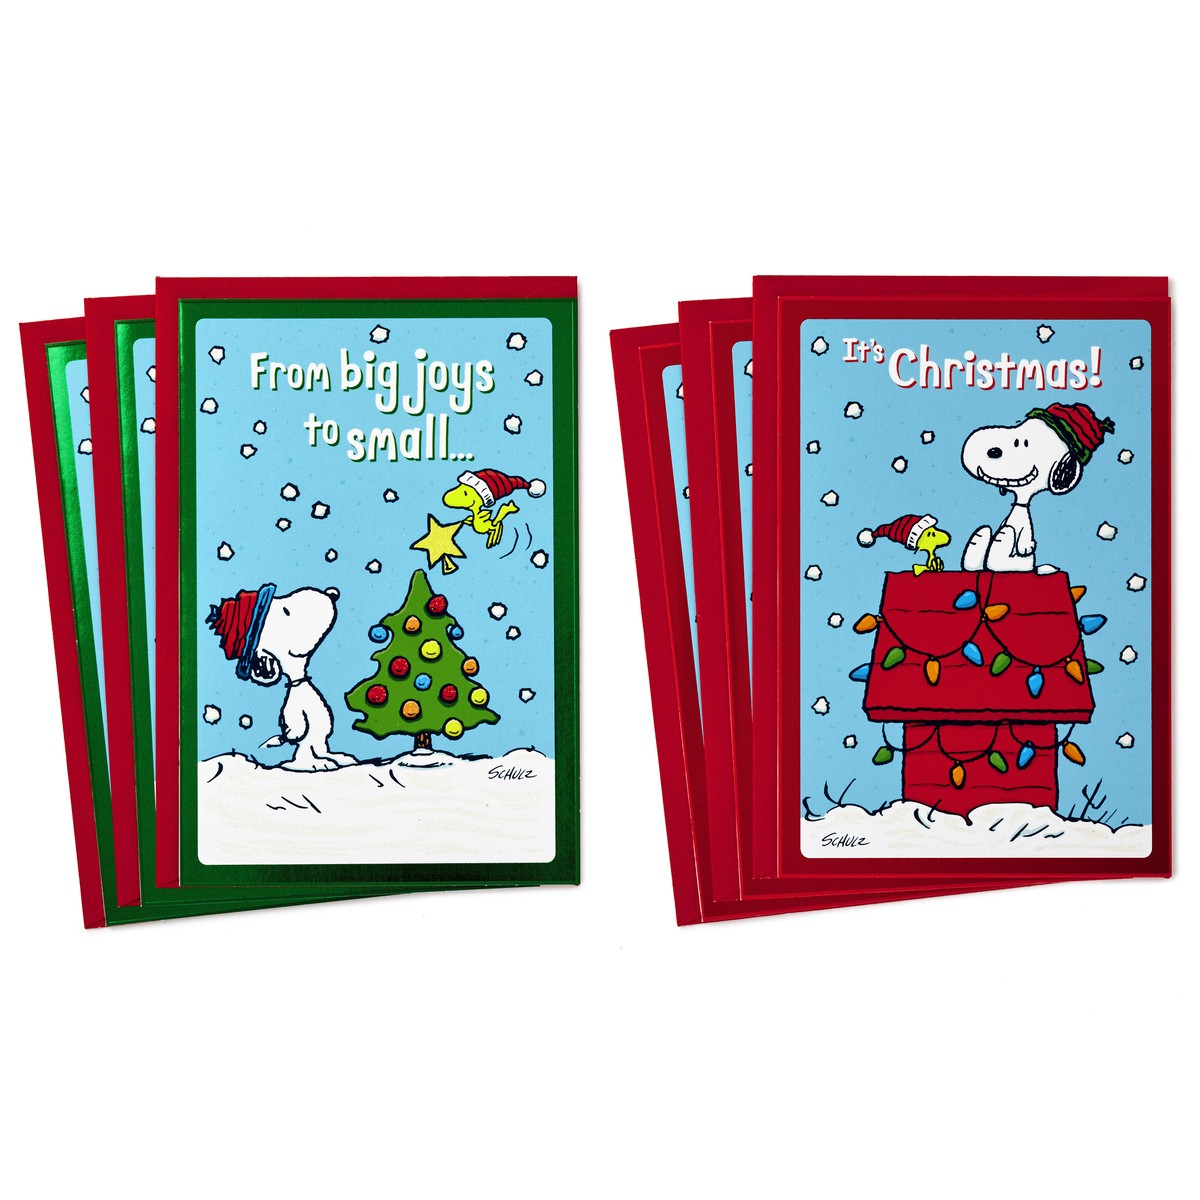 slide 1 of 2, Hallmark Peanuts Christmas Cards Assortment, Snoopy and Woodstock (6 Cards with Envelopes, 2 Designs), 6 ct